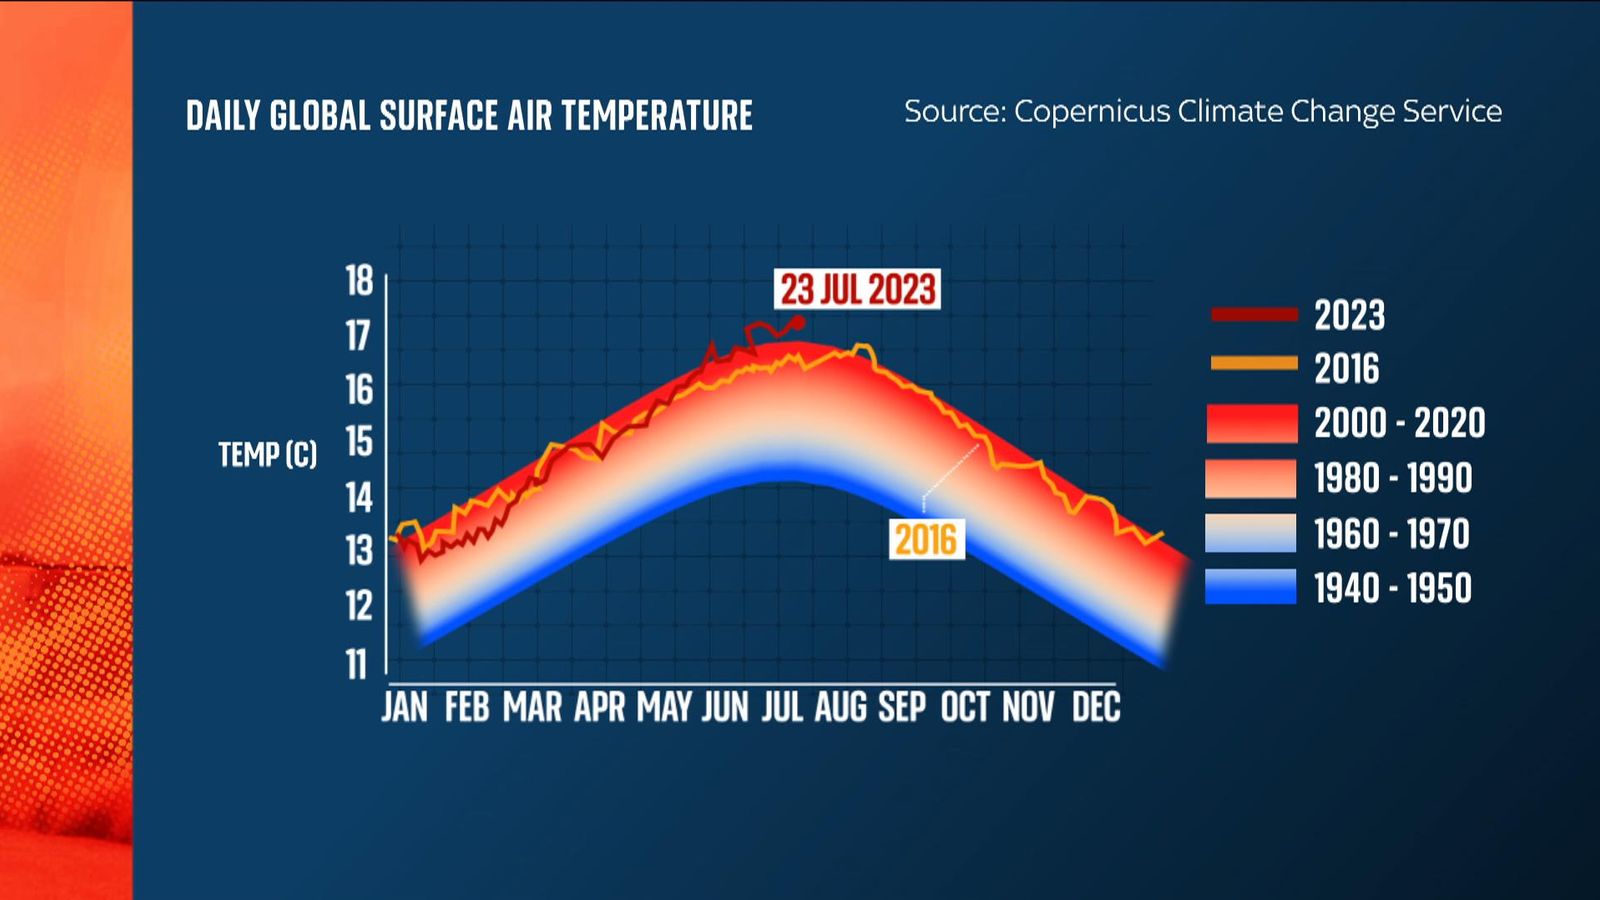 Extreme heat: July to be warmest month month on record, scientists say |  Climate News | Sky News